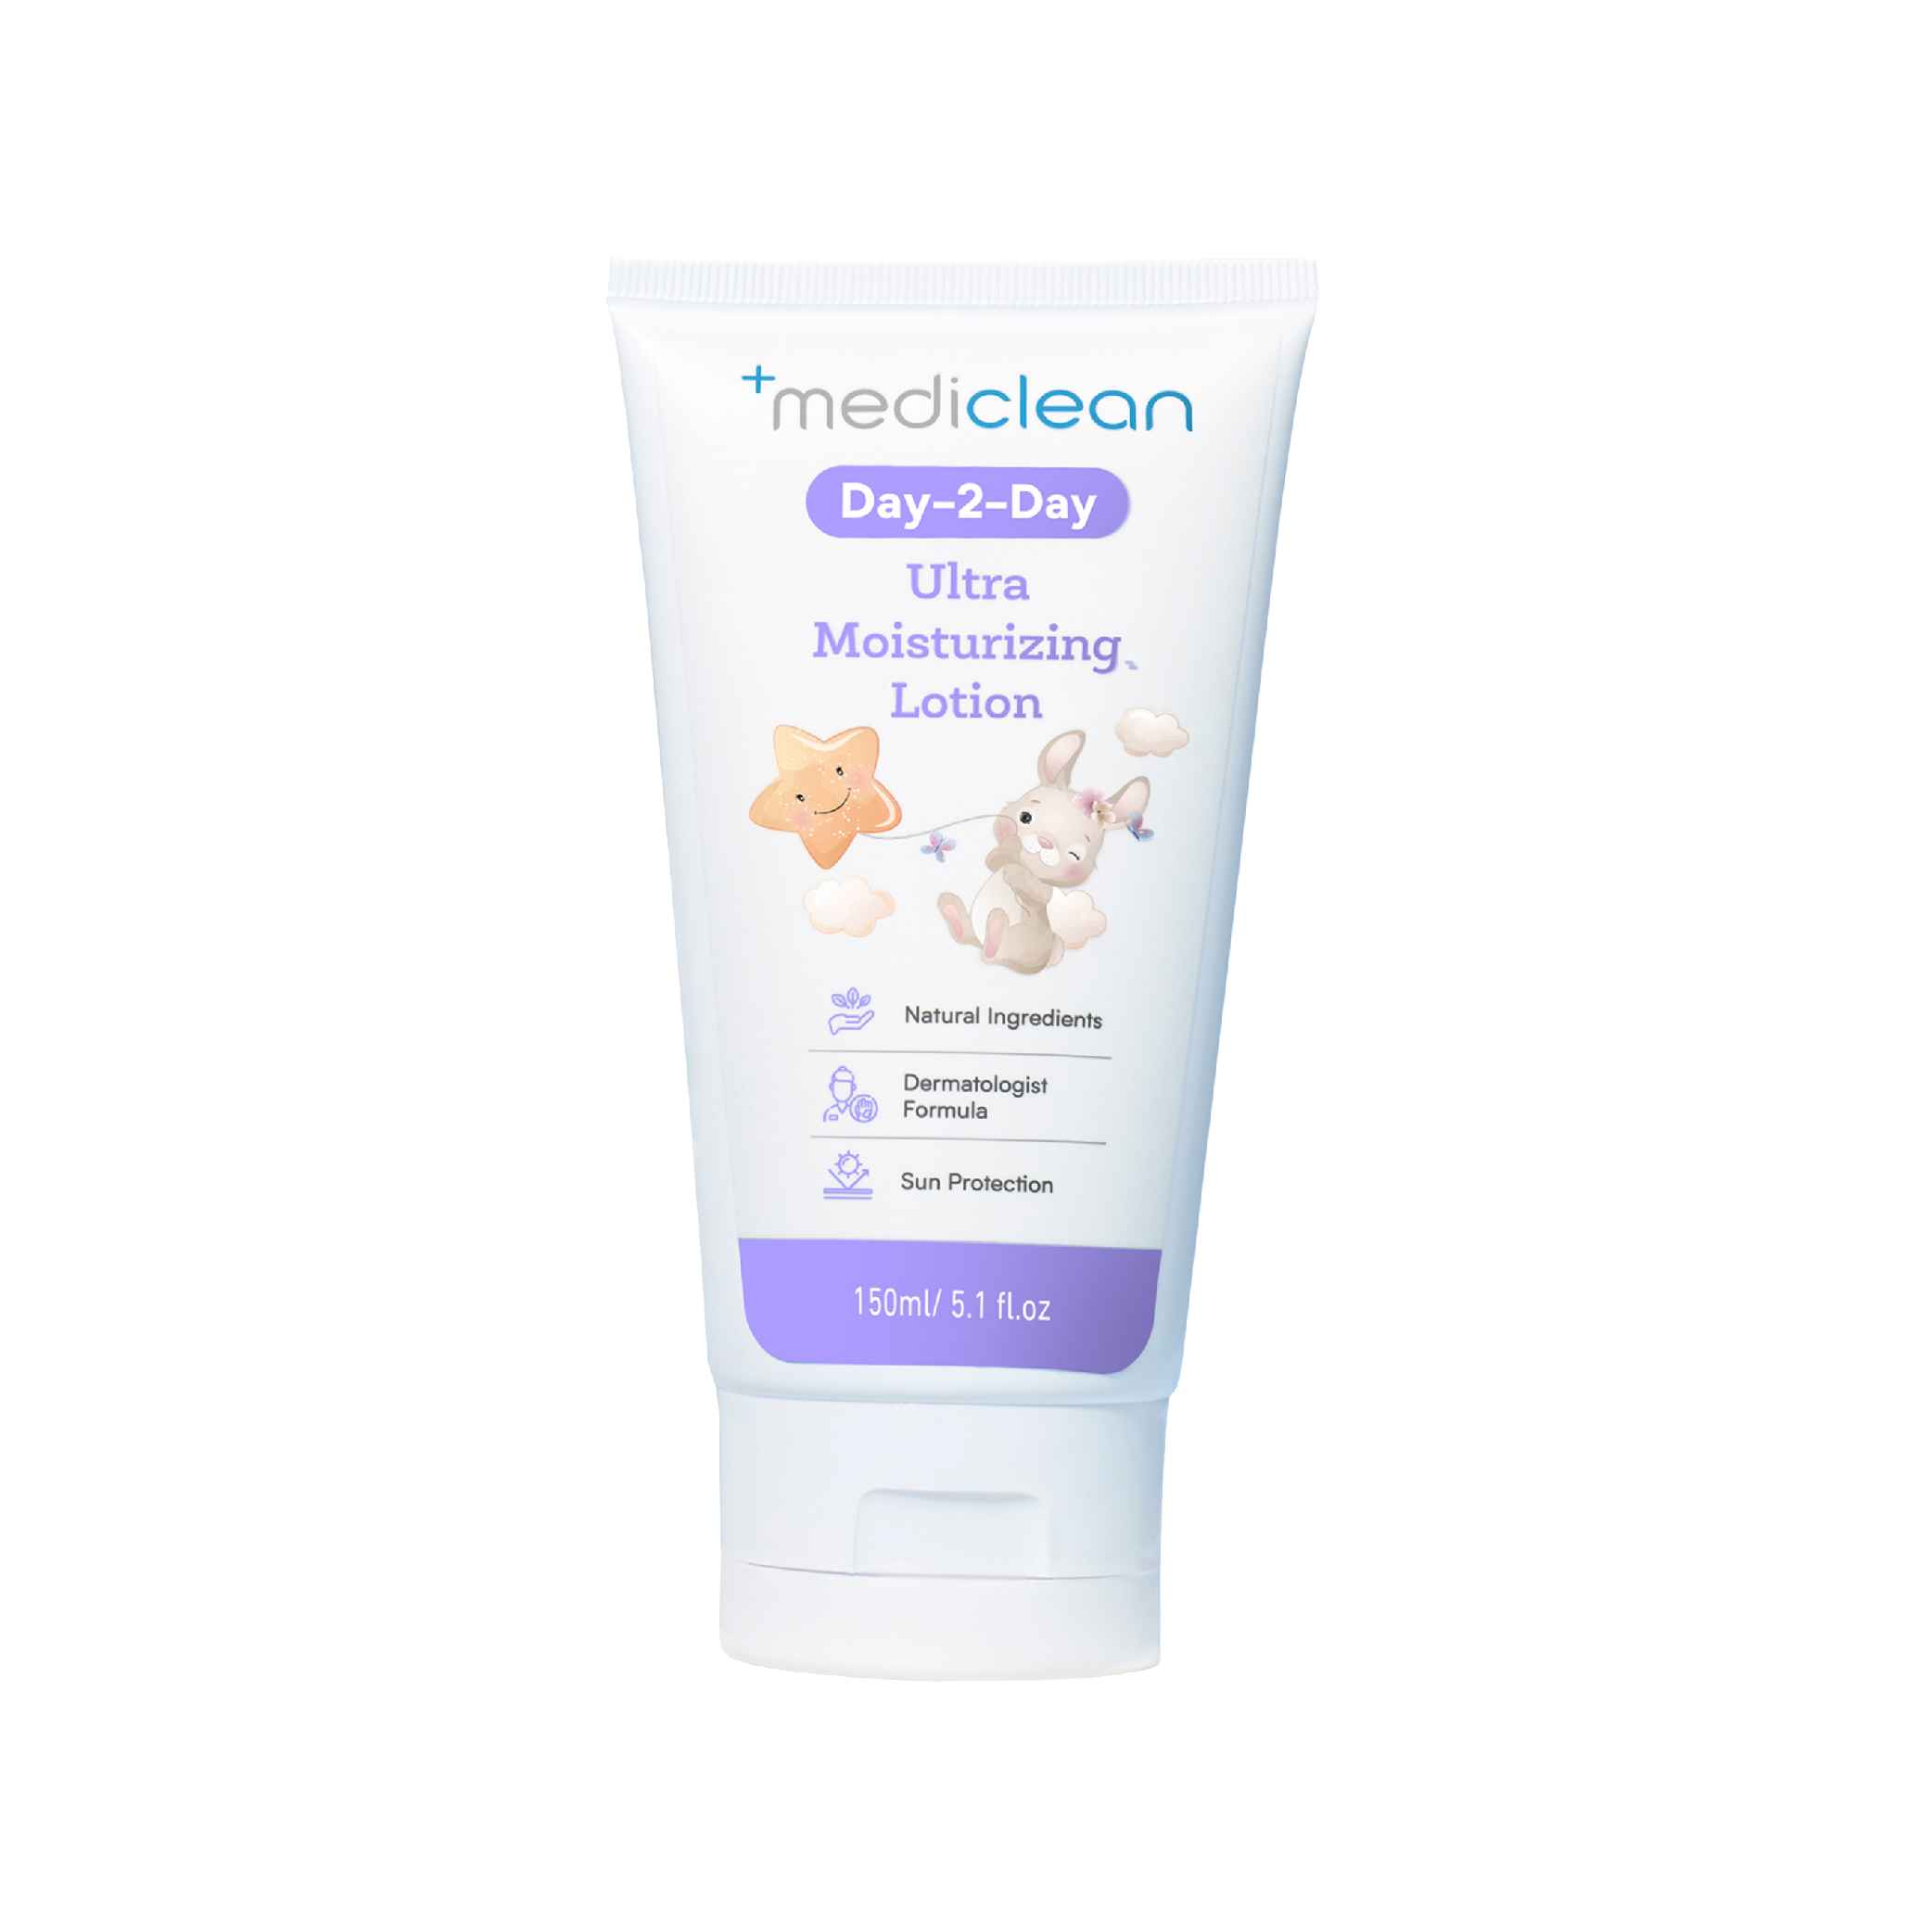 Mediclean Mediclean Day 2 Day Ultra Moisturizing Lotion